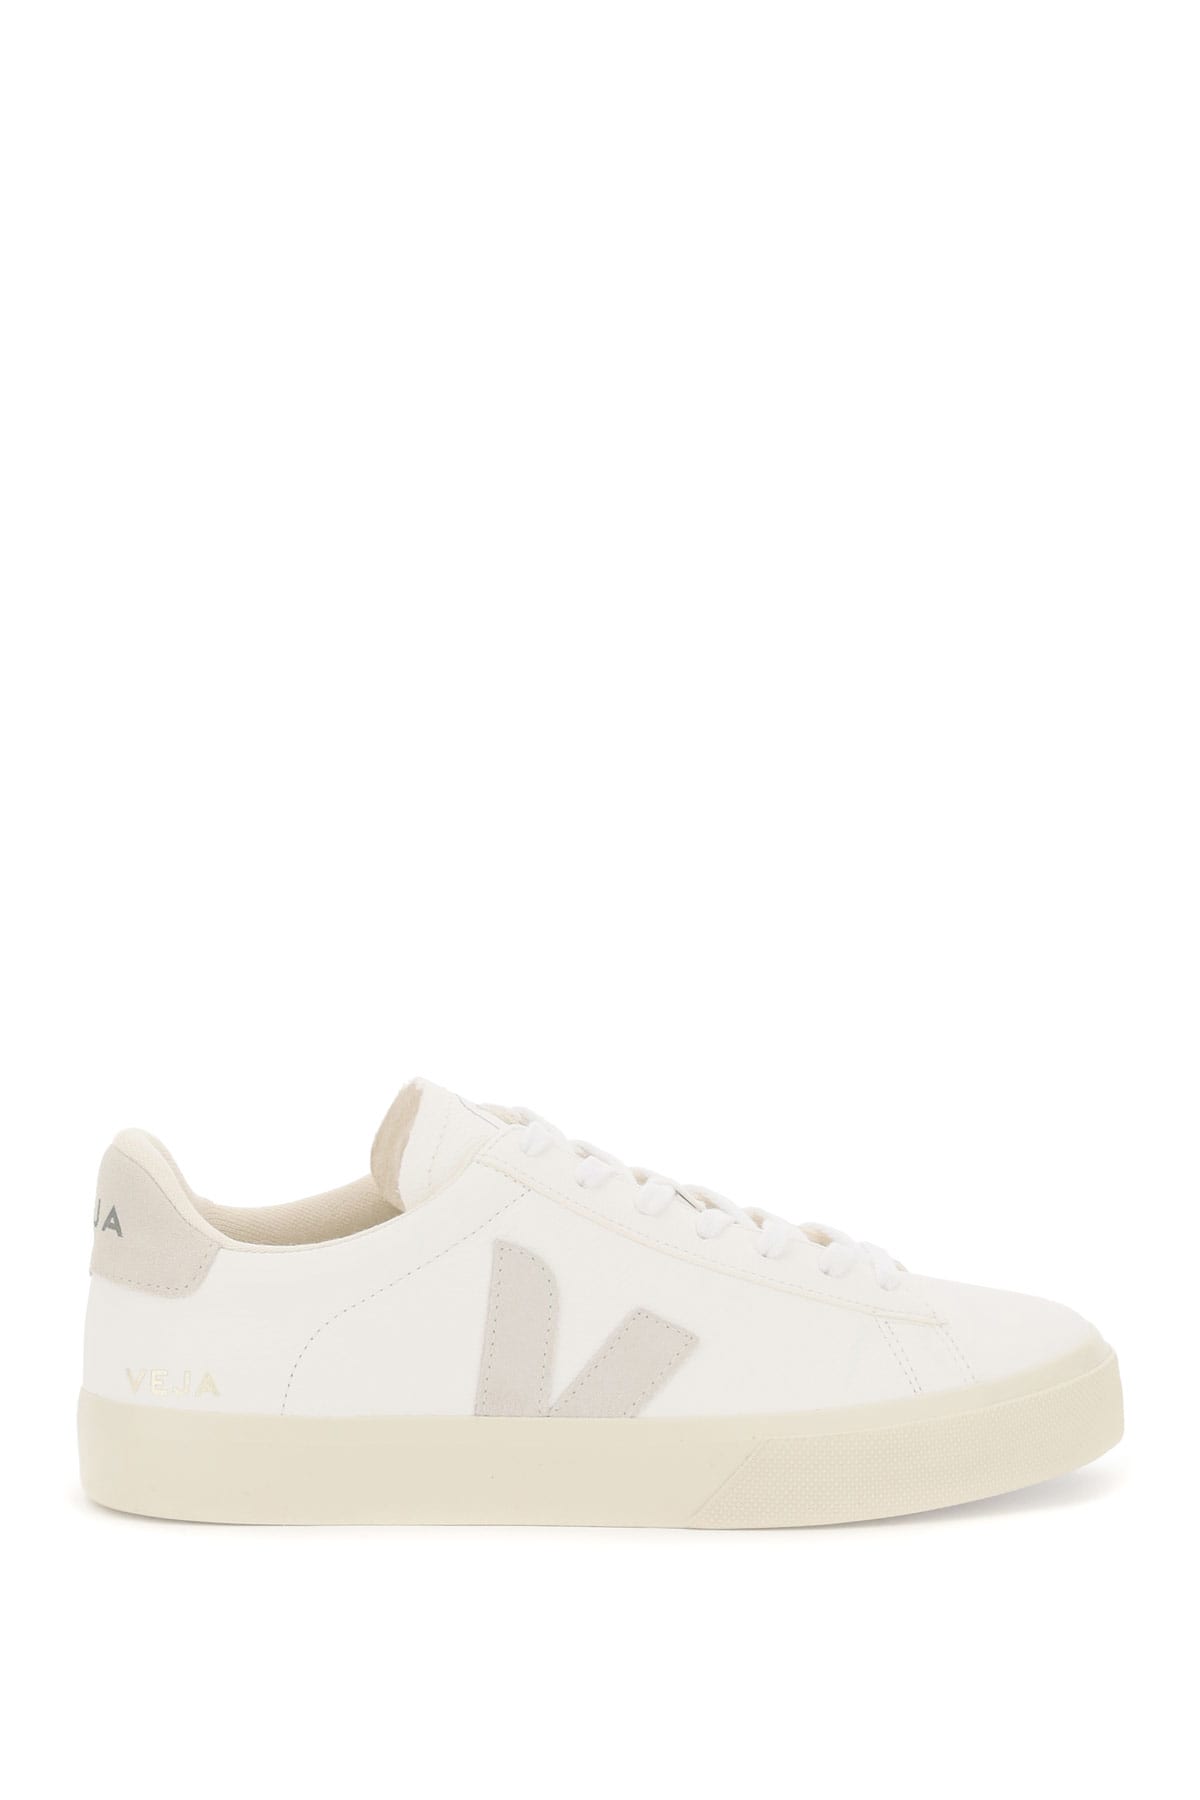 Shop Veja Campo Sneakers In Extra White Natural Suede (white)